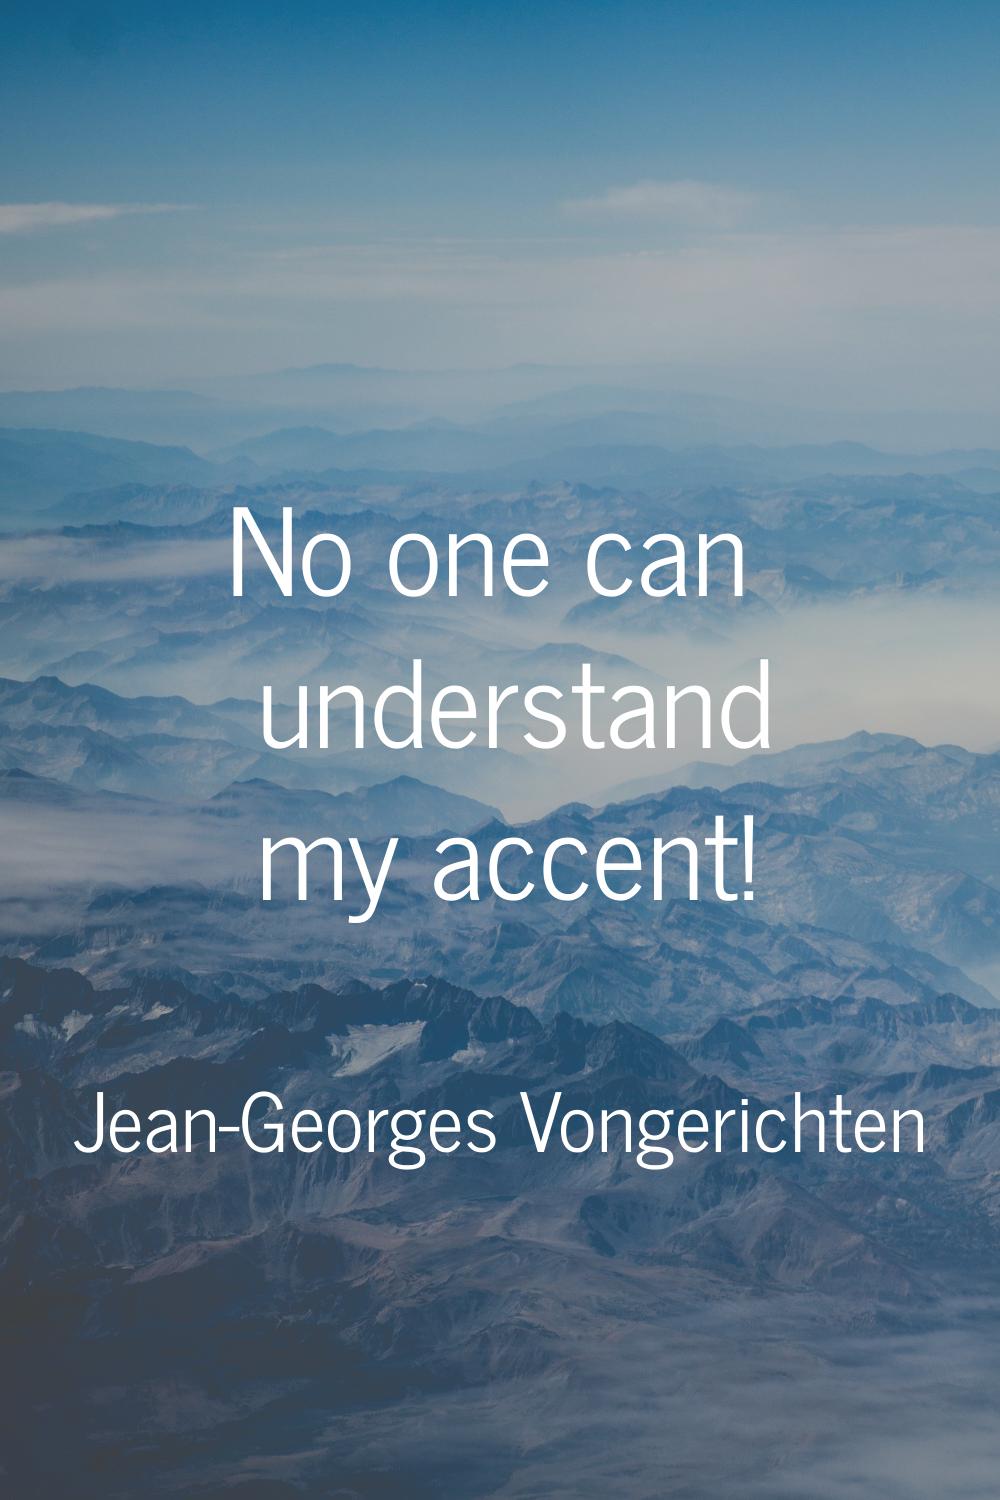 No one can understand my accent!